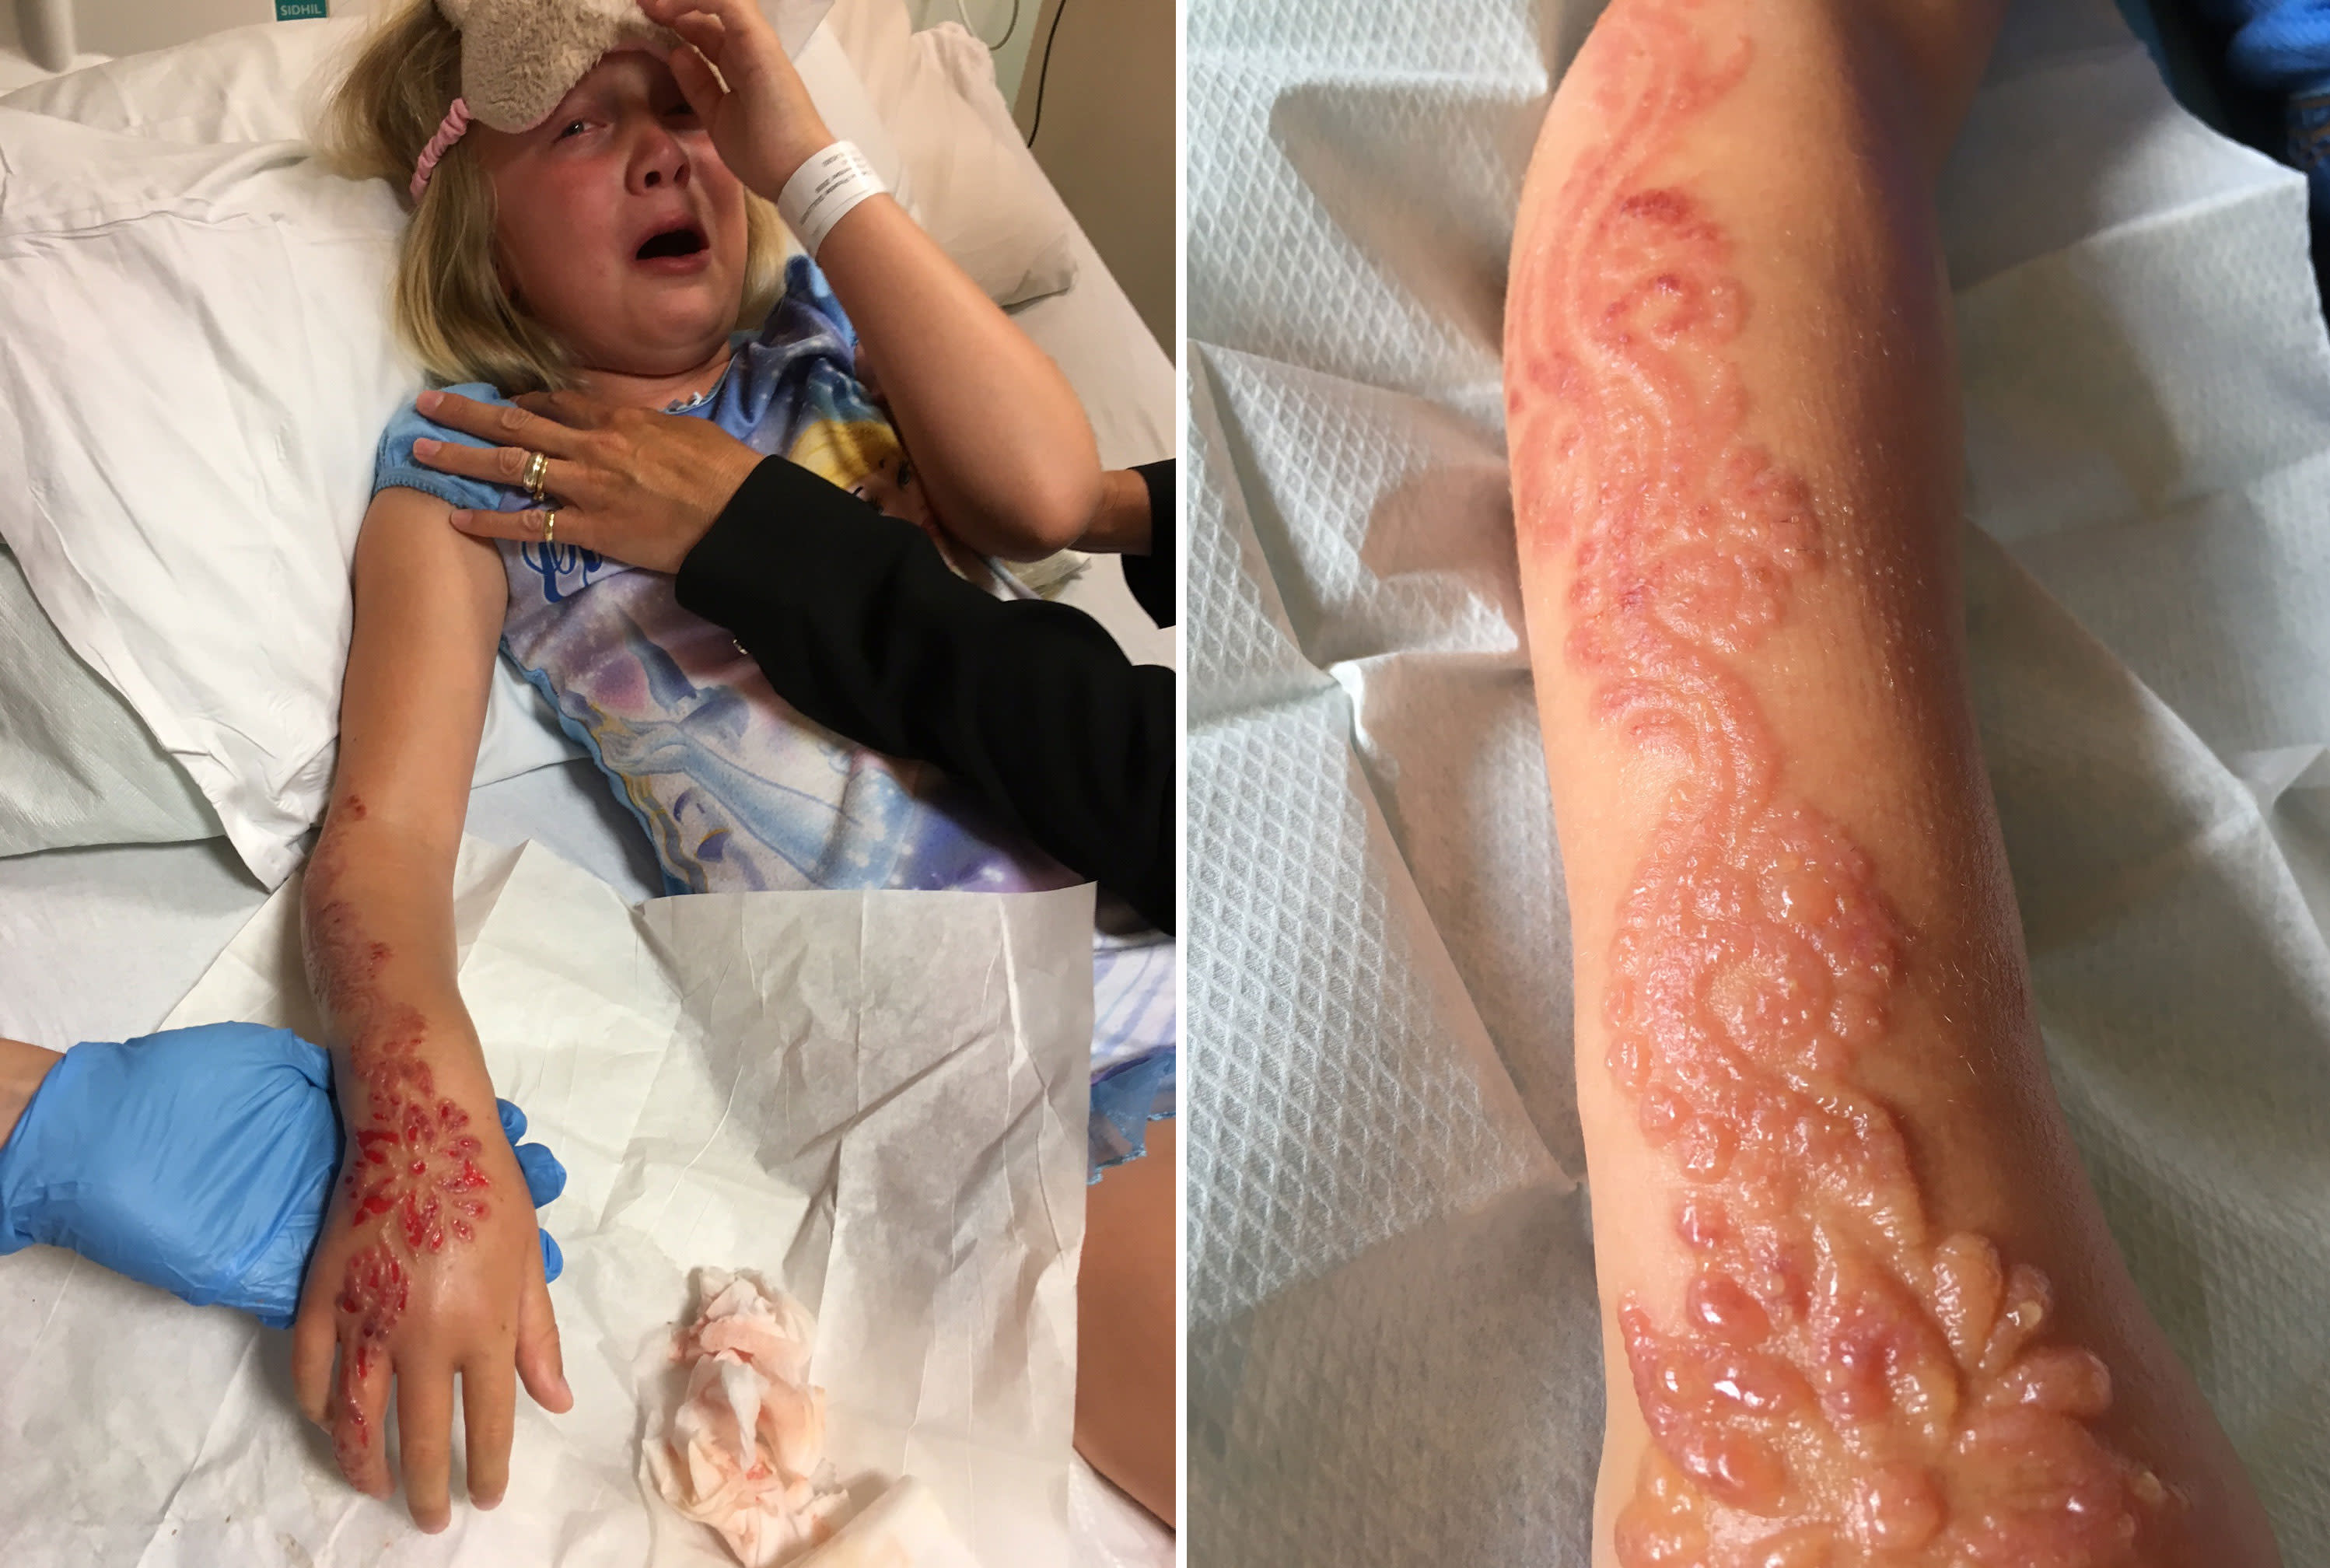 Young girl left with horrific burns and permanent scarring ...